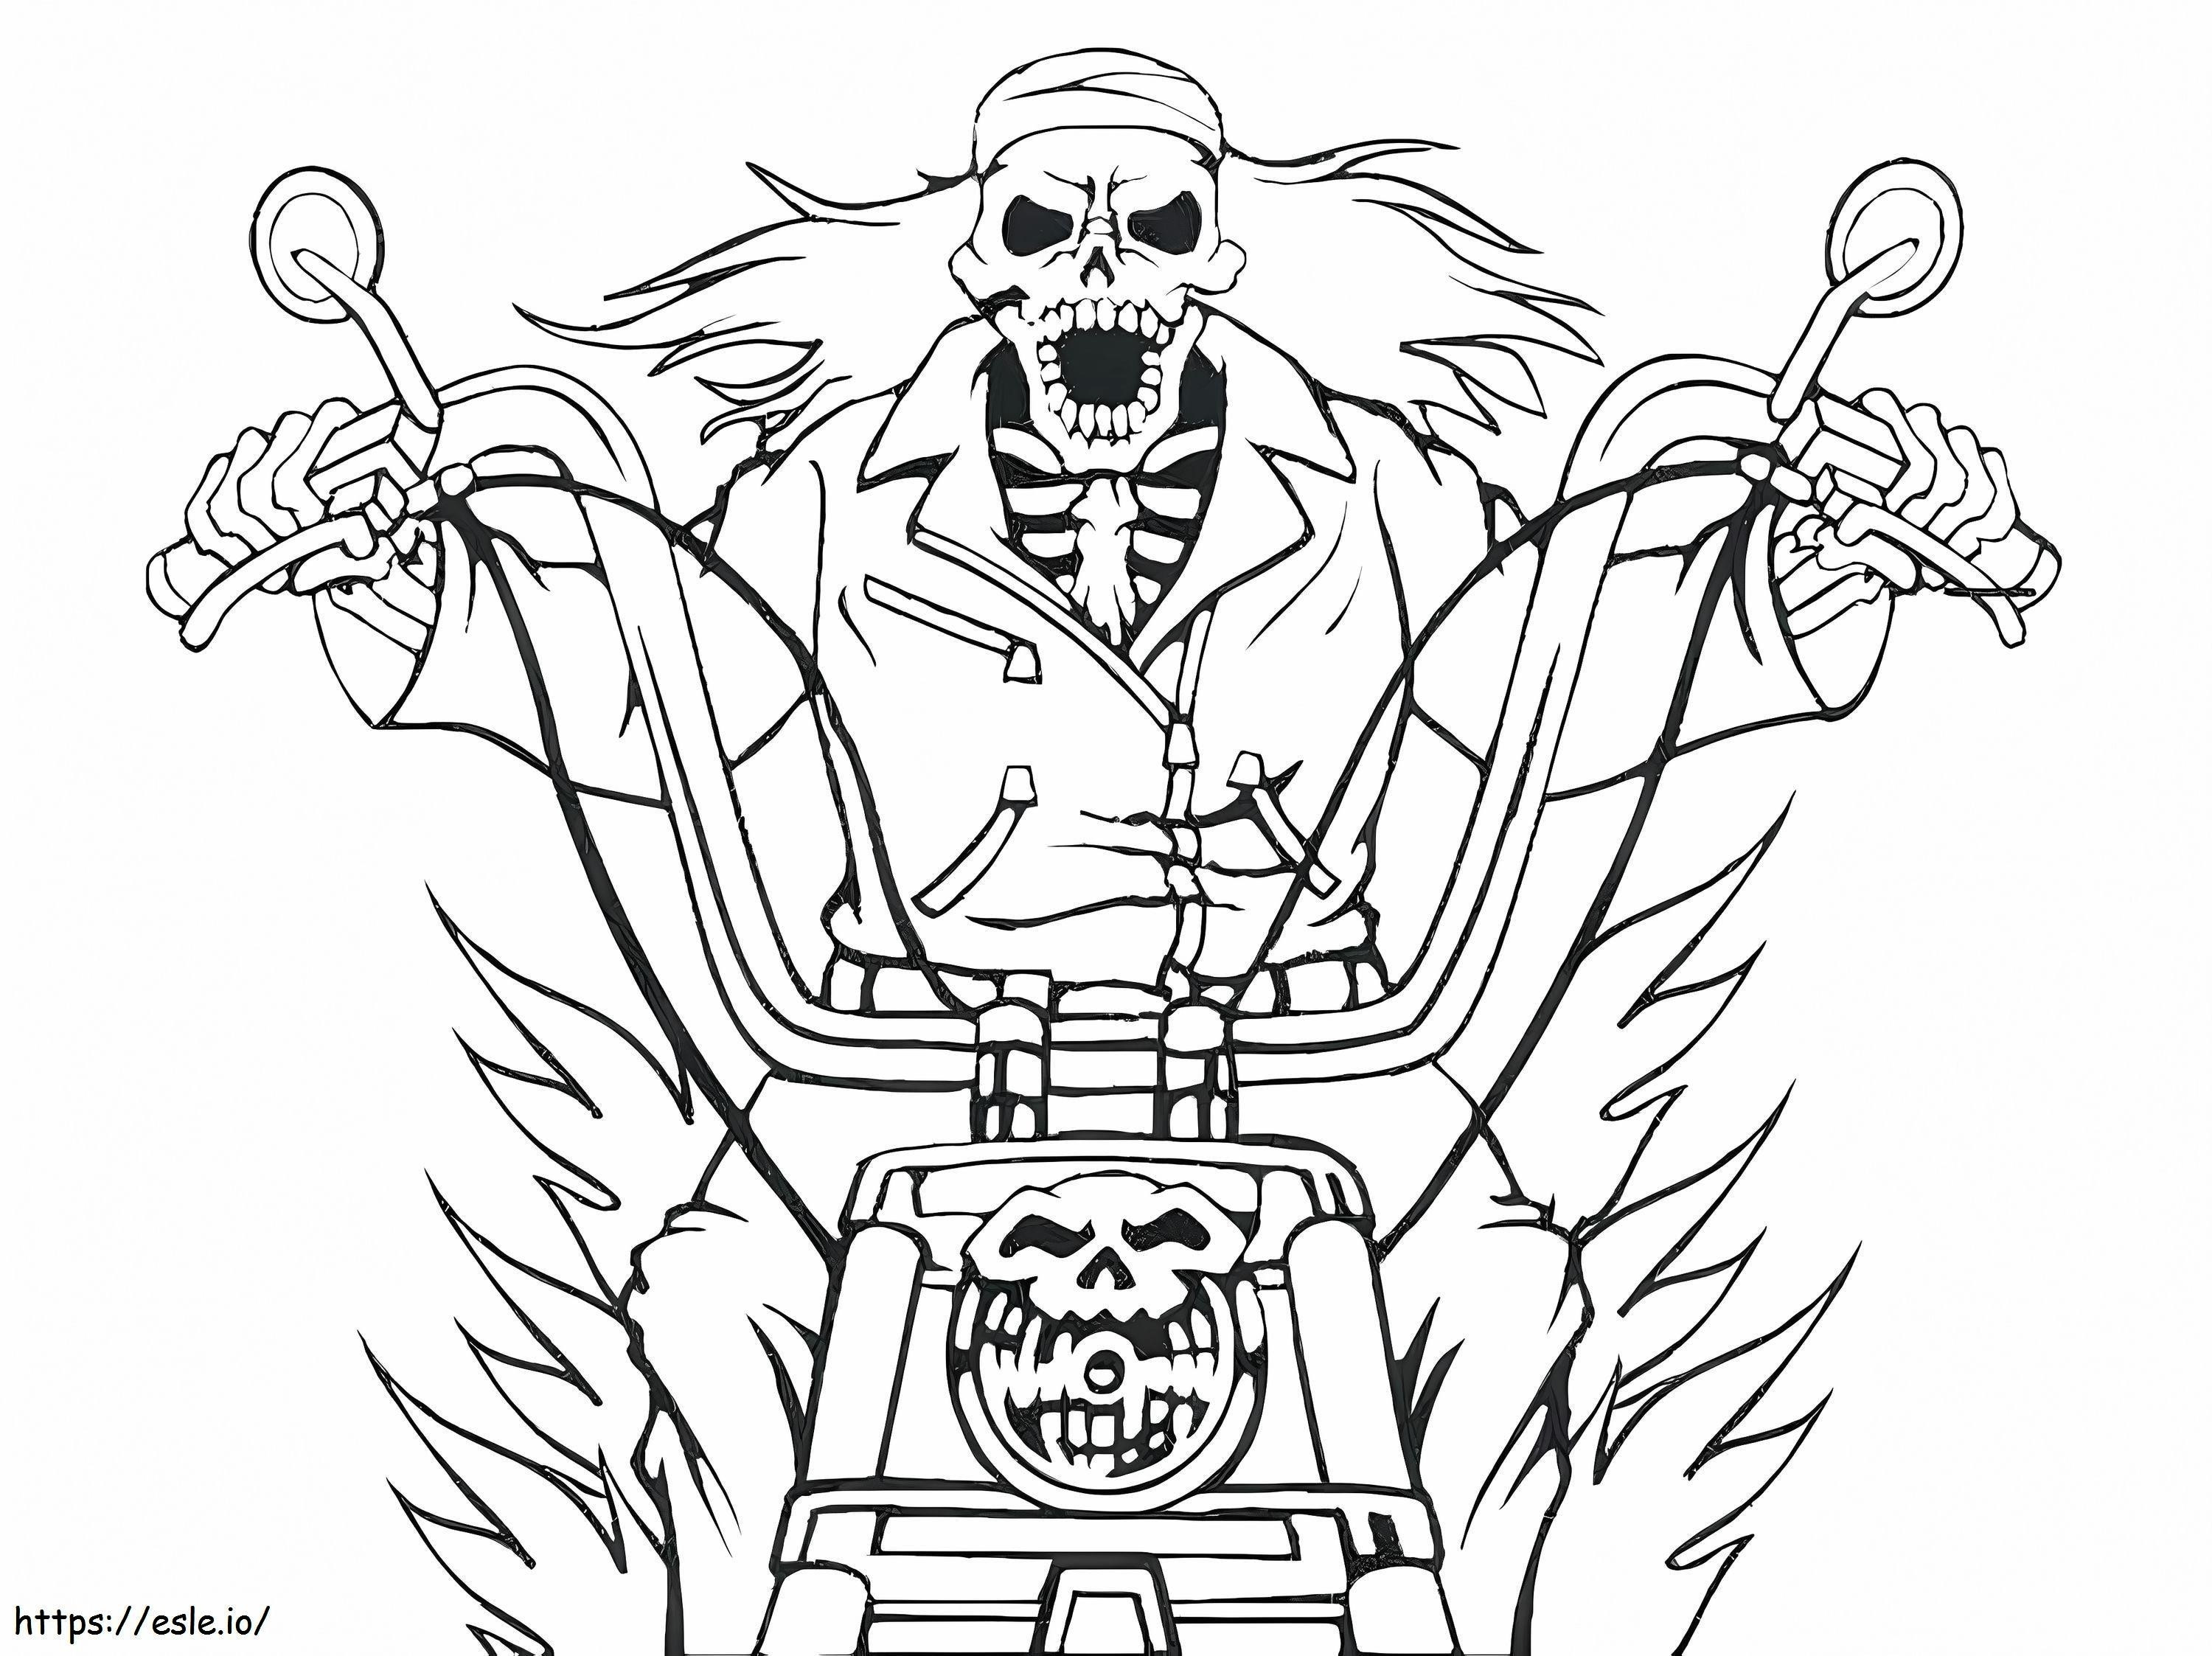 Ghost Rider Laughing coloring page